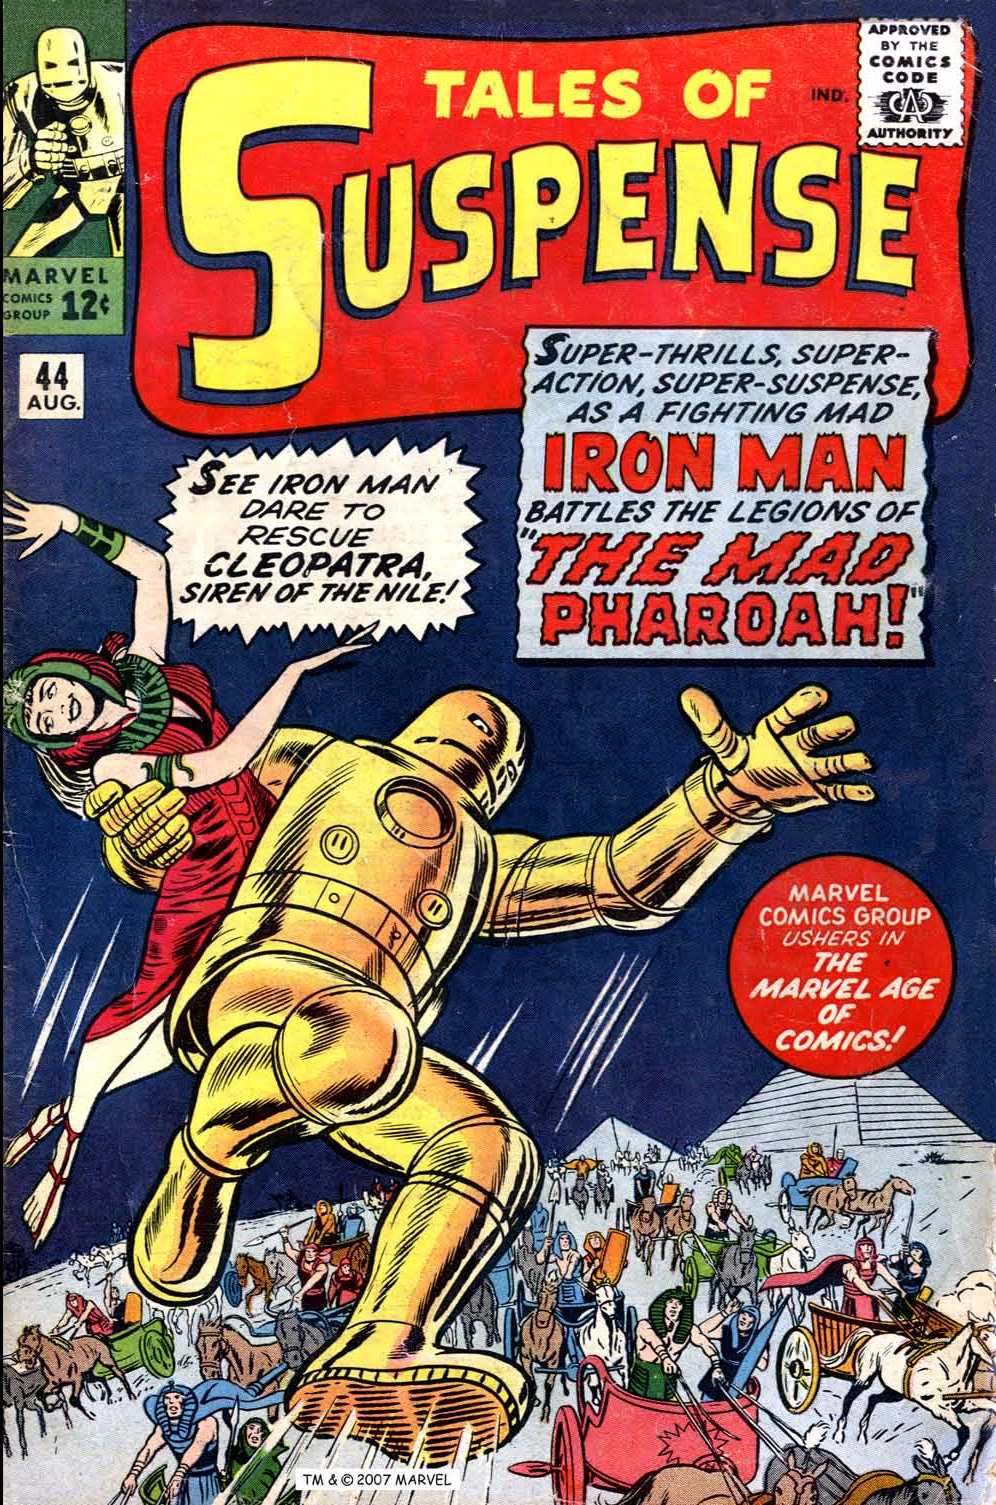 Iron Man rescuing Cleopatra on cover of TOS44